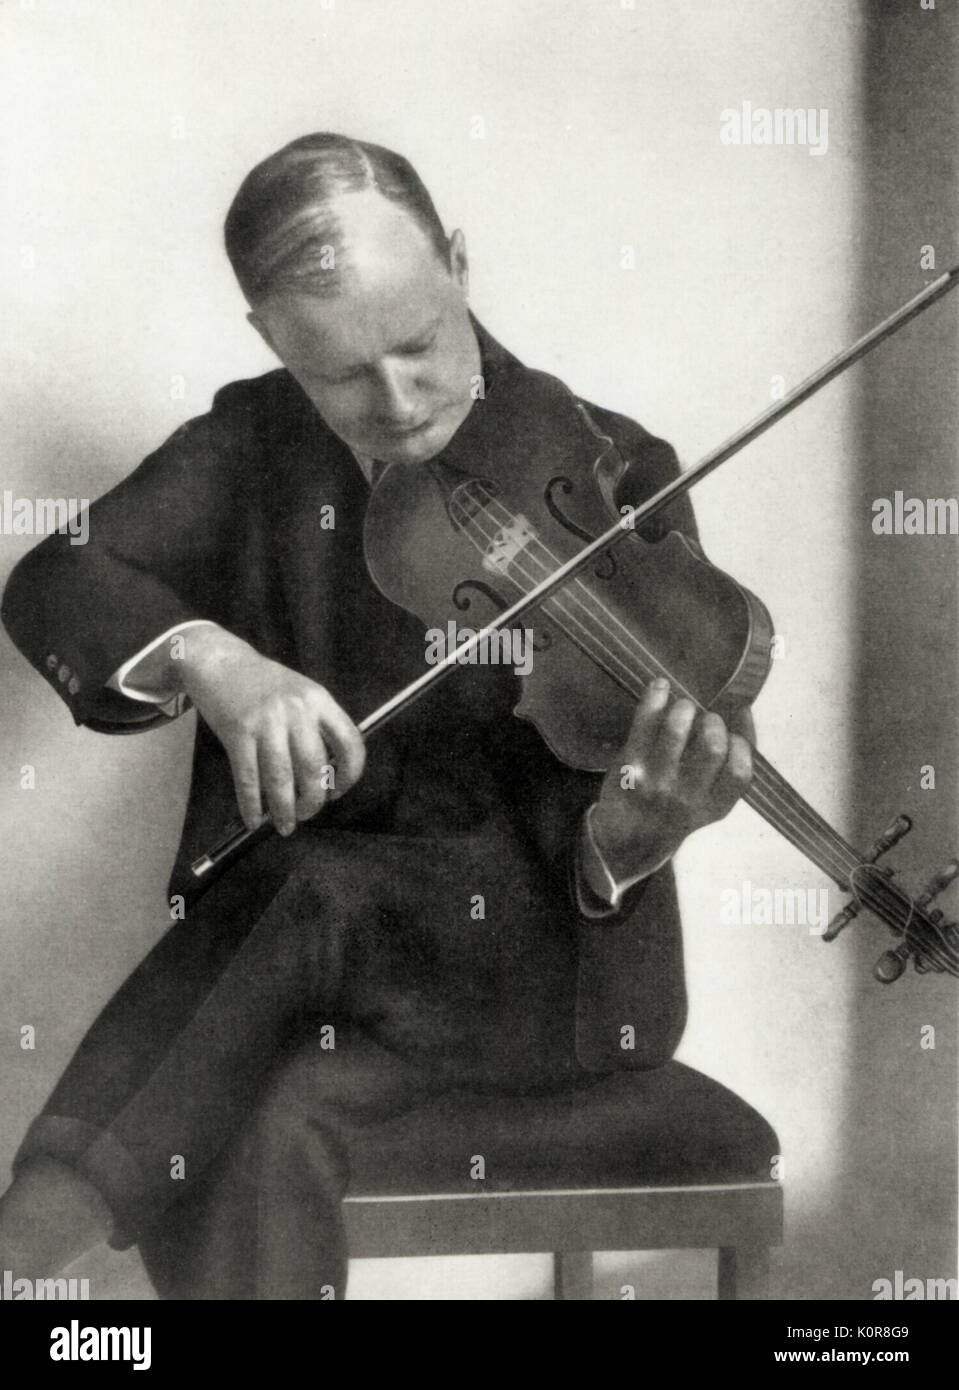 Paul HINDEMITH - playing his violin  c. 1932.  German composer and violinist,  (16 November 1895 - 28 December 1963) Stock Photo